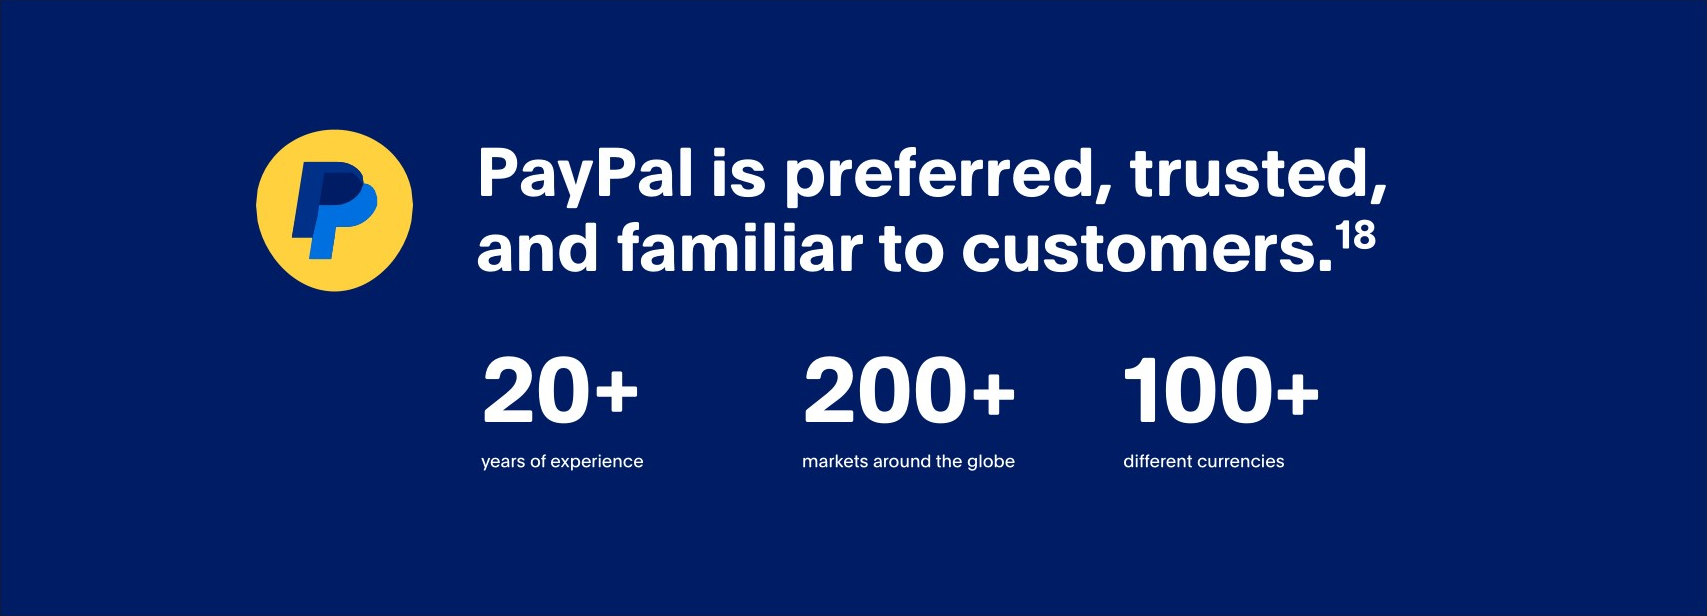 PayPal trusted